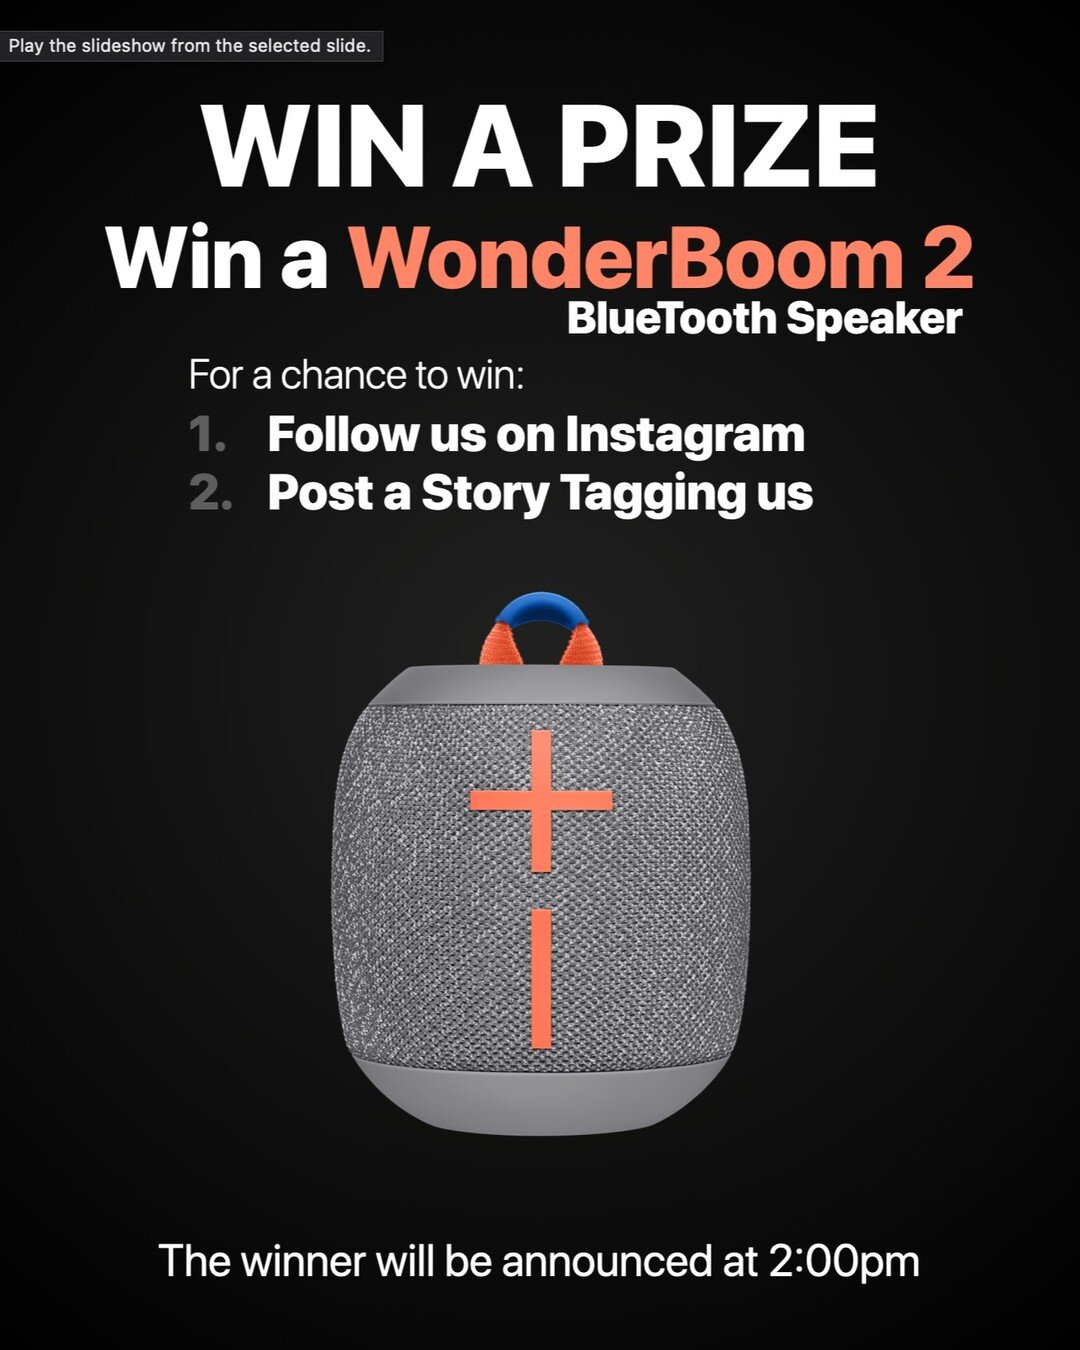 Today on Open Day, we're giving away a WonderBoom 2 Bluetooth Speaker!!

Follow the instructions for your chance to win:
- Follow Us on Instagram
- Post a Story Tagging Us